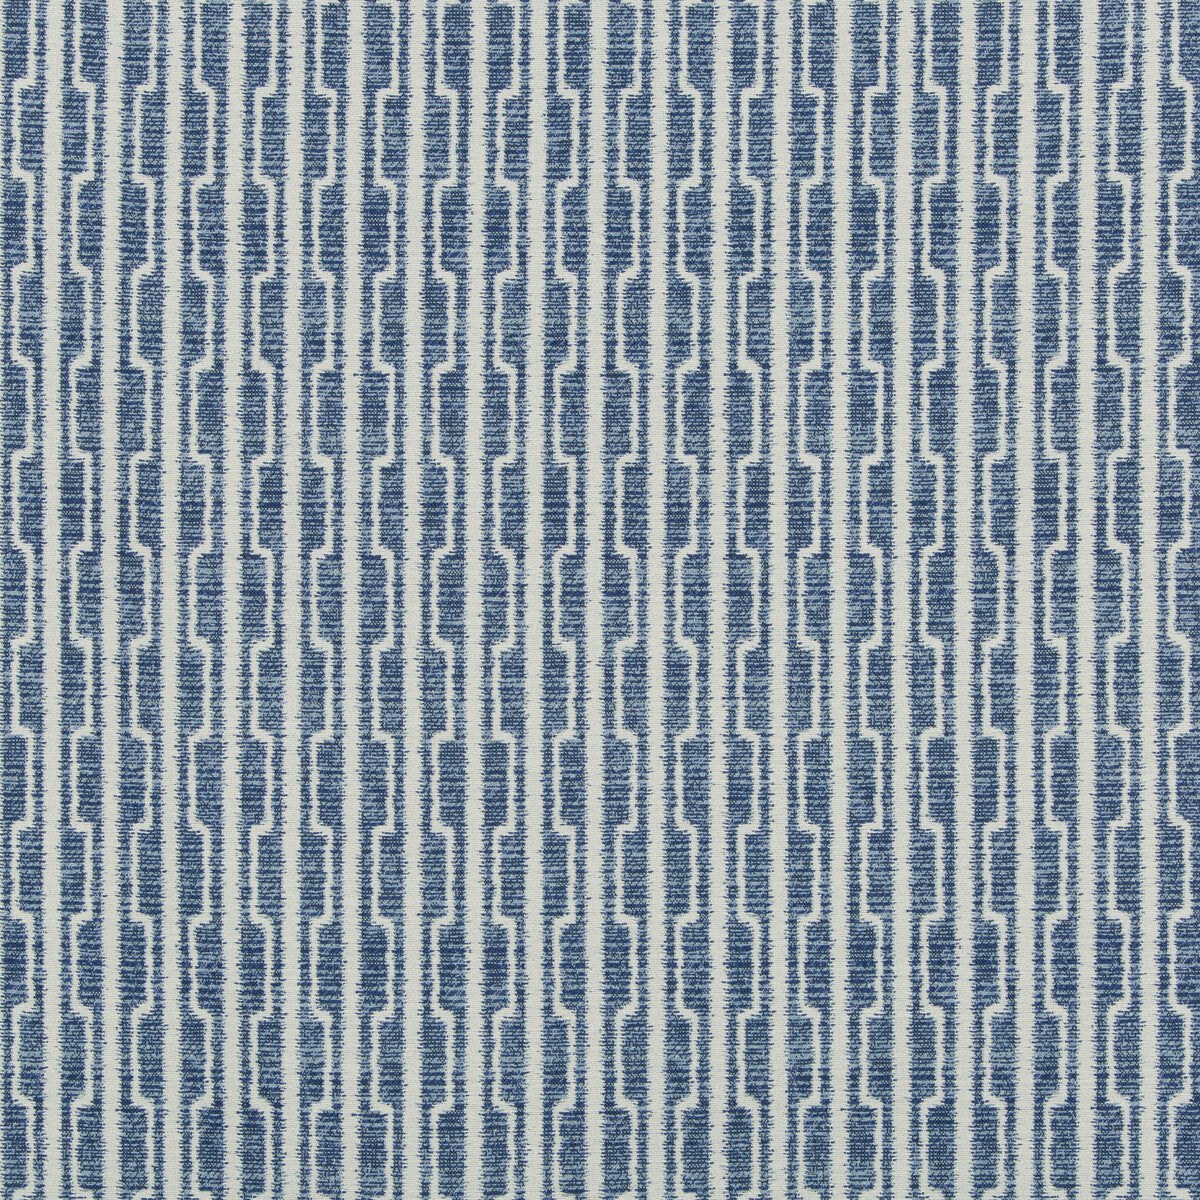 Kravet Design fabric in 36084-51 color - pattern 36084.51.0 - by Kravet Design in the Inside Out Performance Fabrics collection